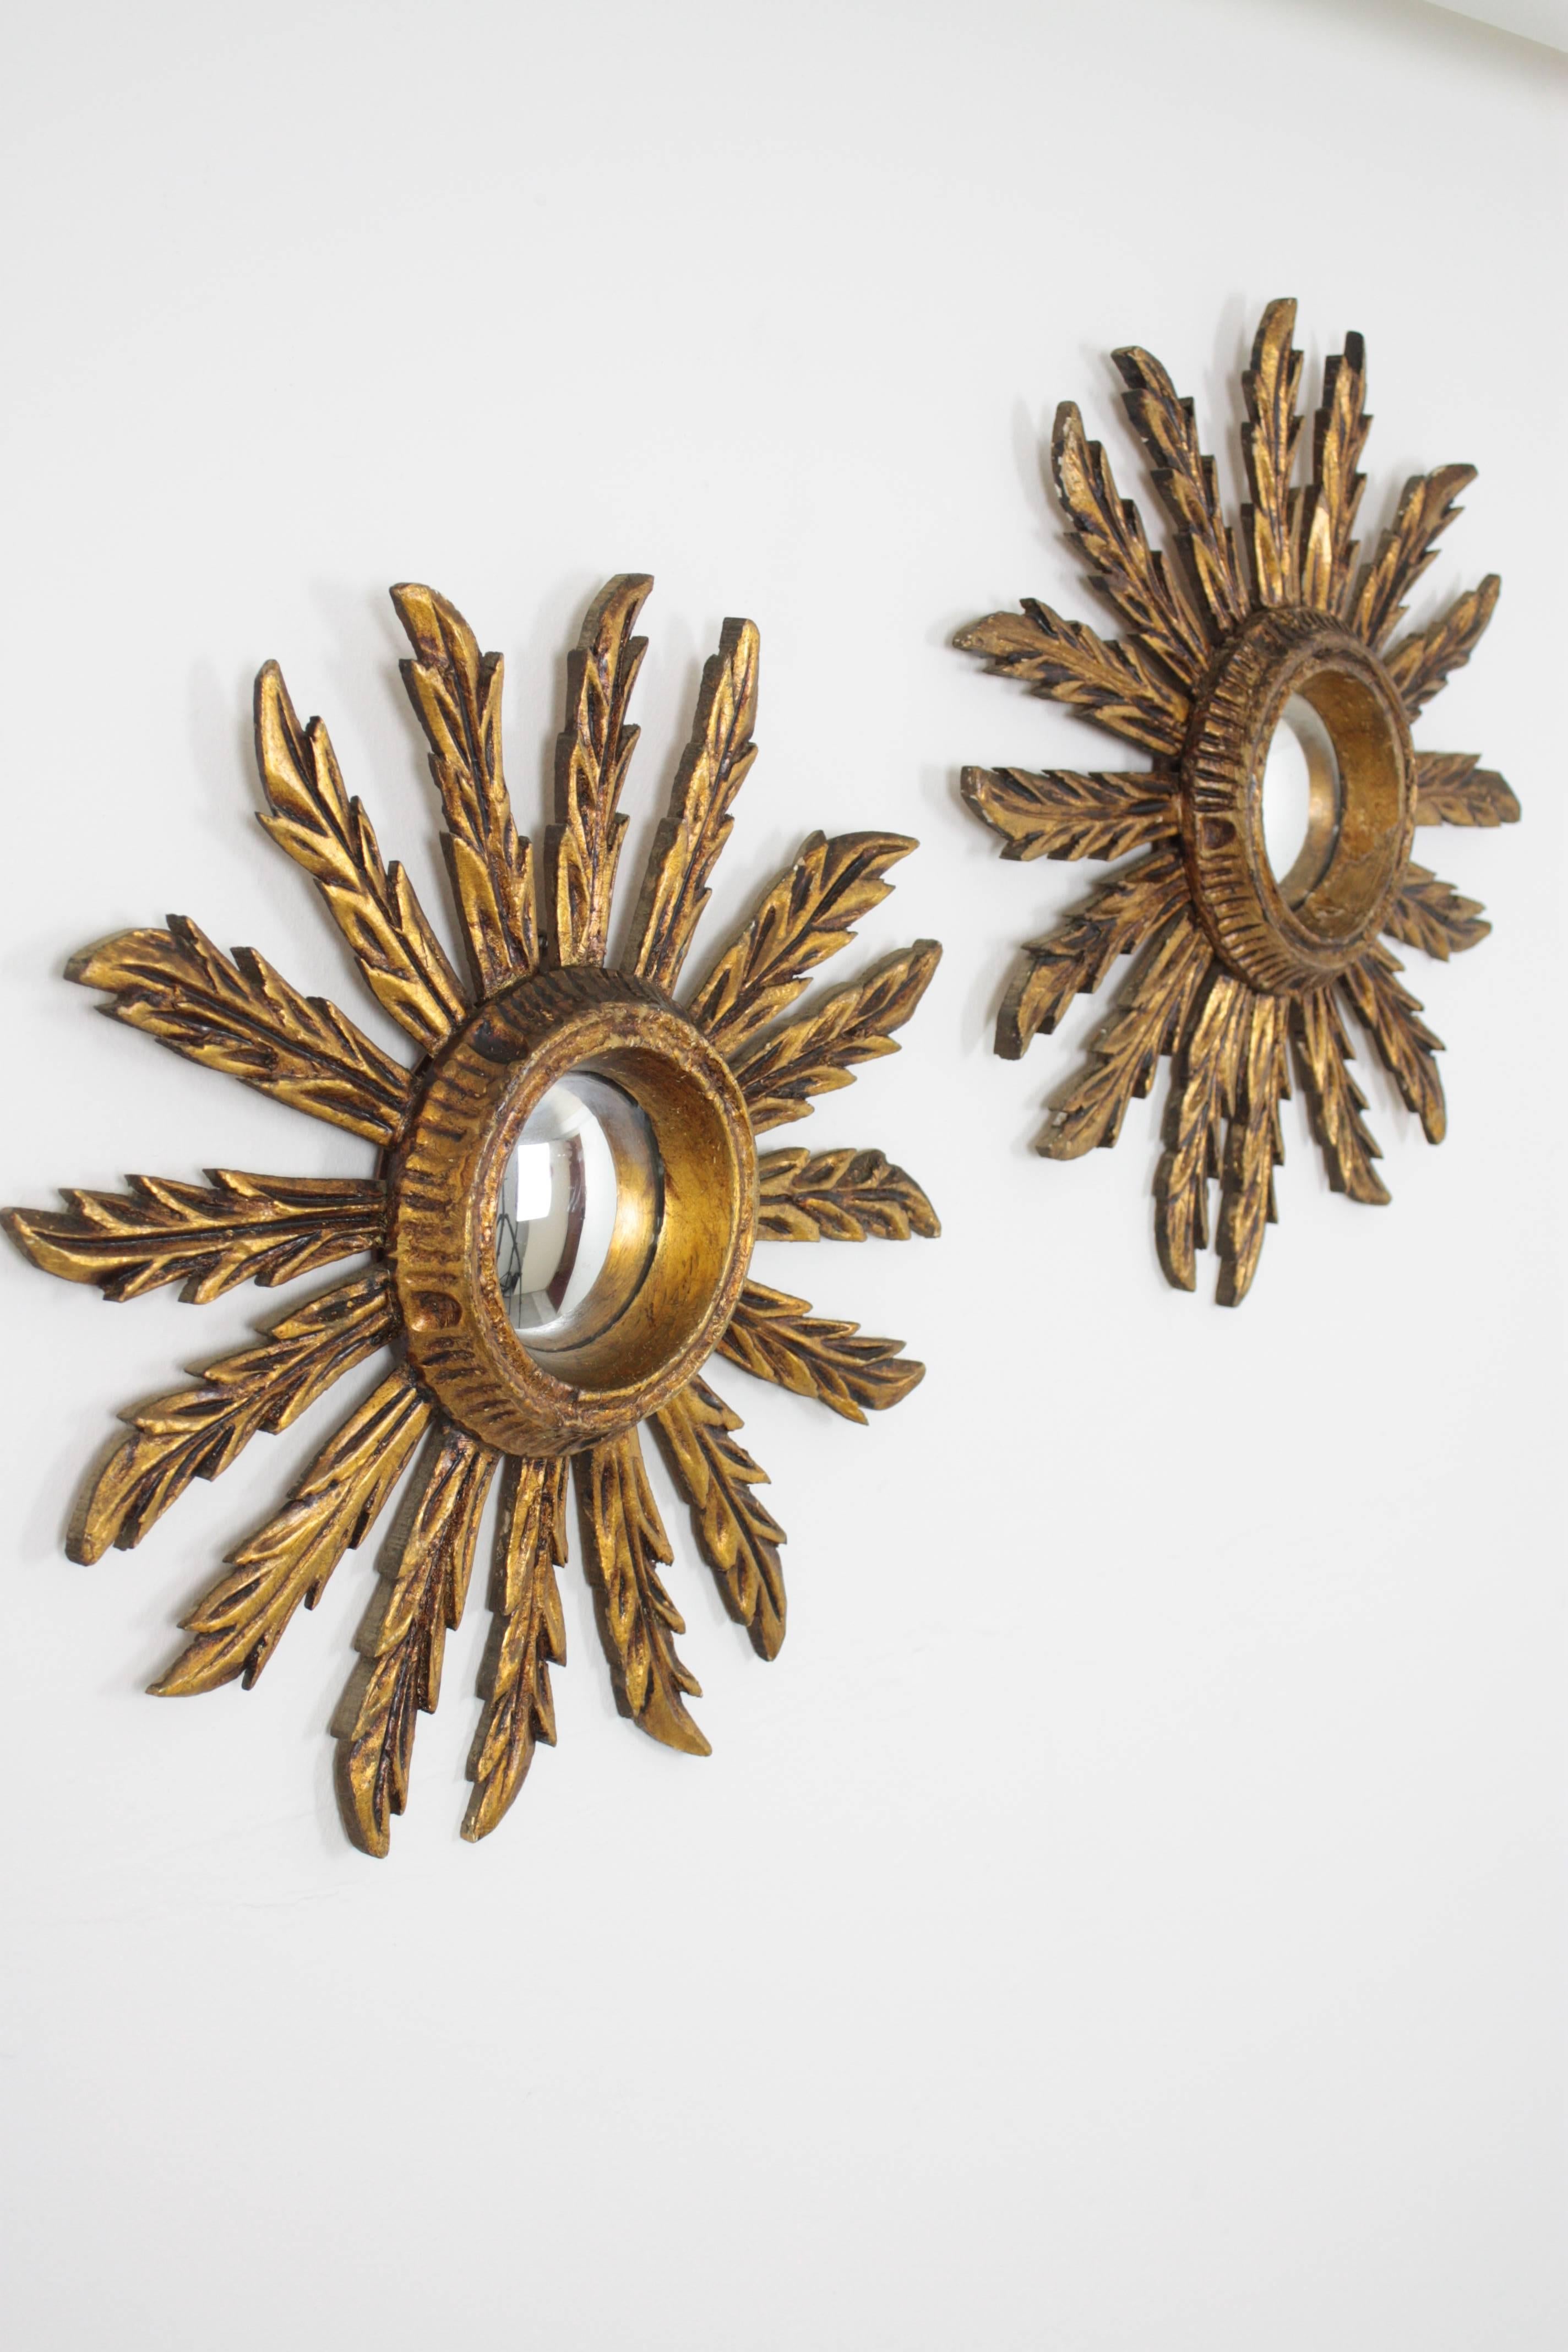 Beautiful pair of sunburst mirrors in this unusual mini size in Baroque style. Carved wood covered with gesso and gold leaf finish. Lovely vintage patina. Both of them wear the original convex glass mirror. Dimensions of the glass: 8.5 cm